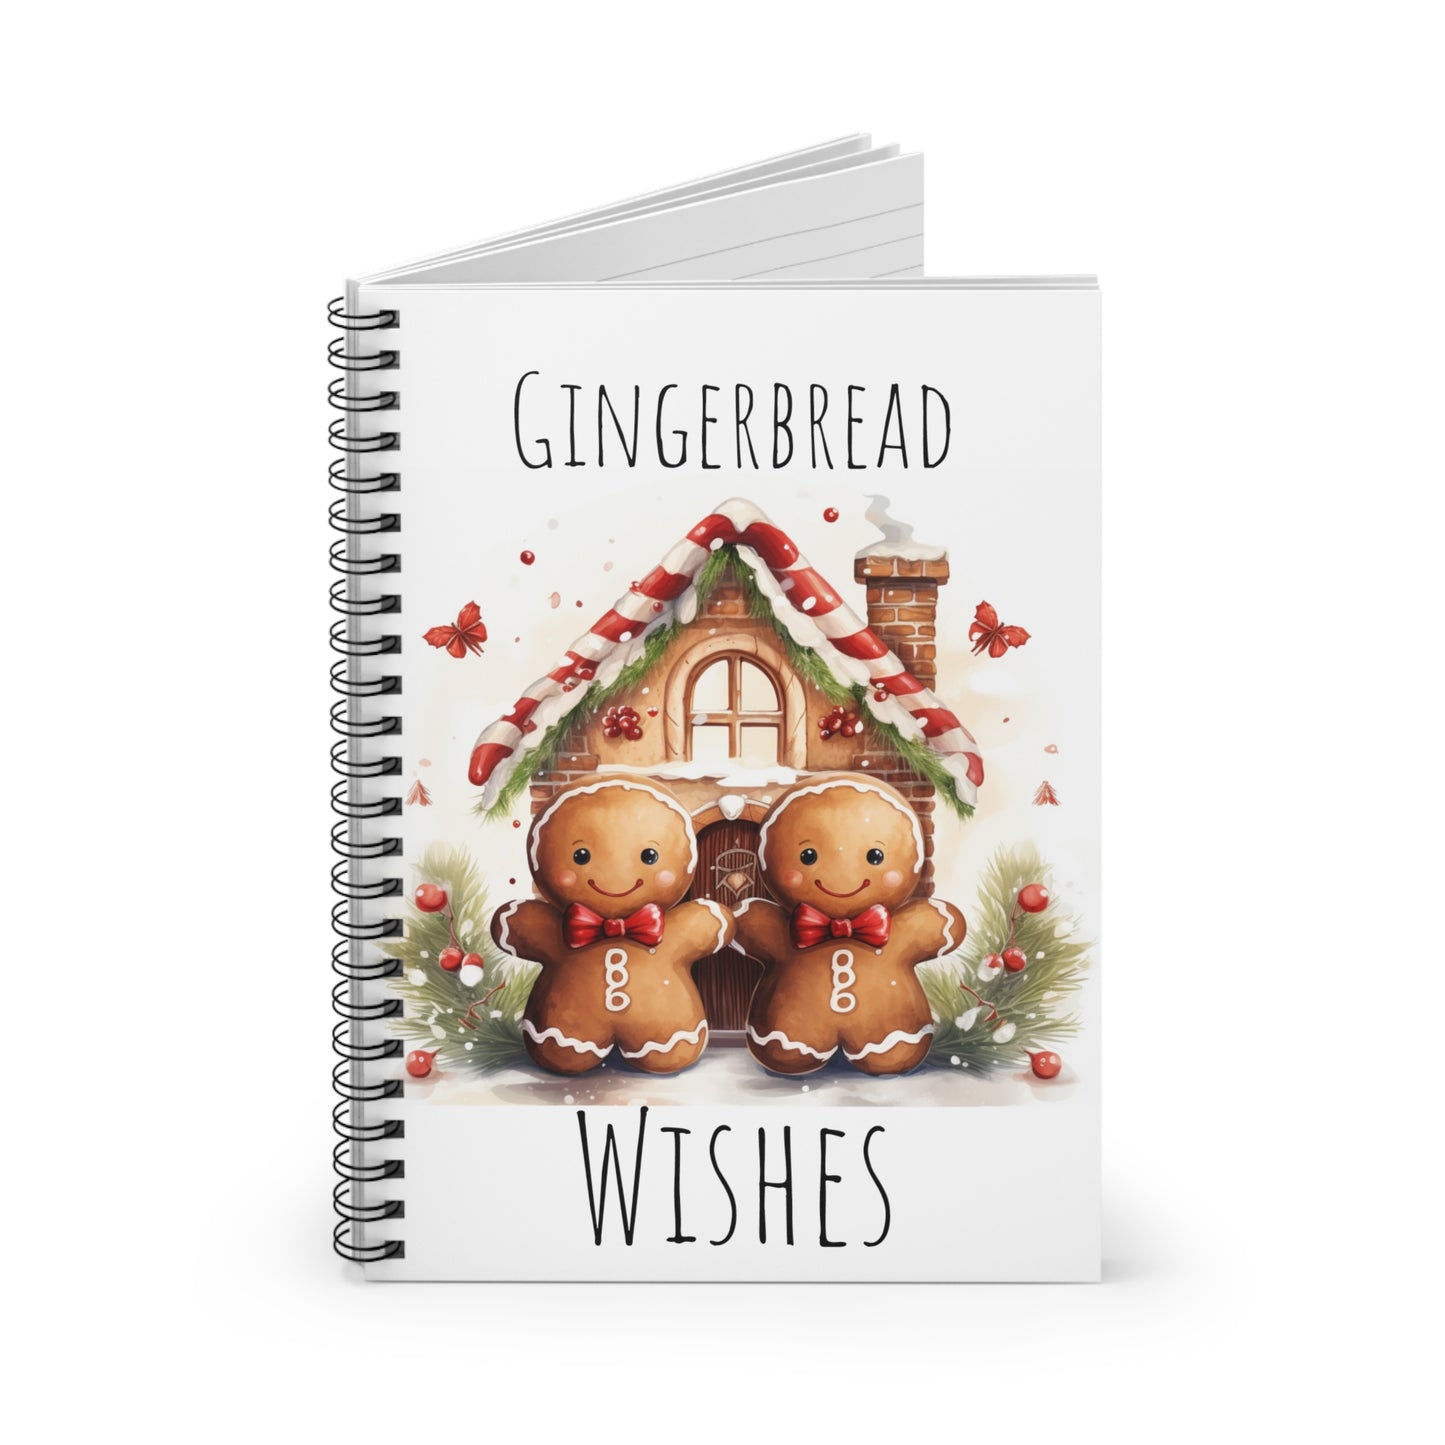 Gingerbread Wishes Spiral Notebook - Ruled Line